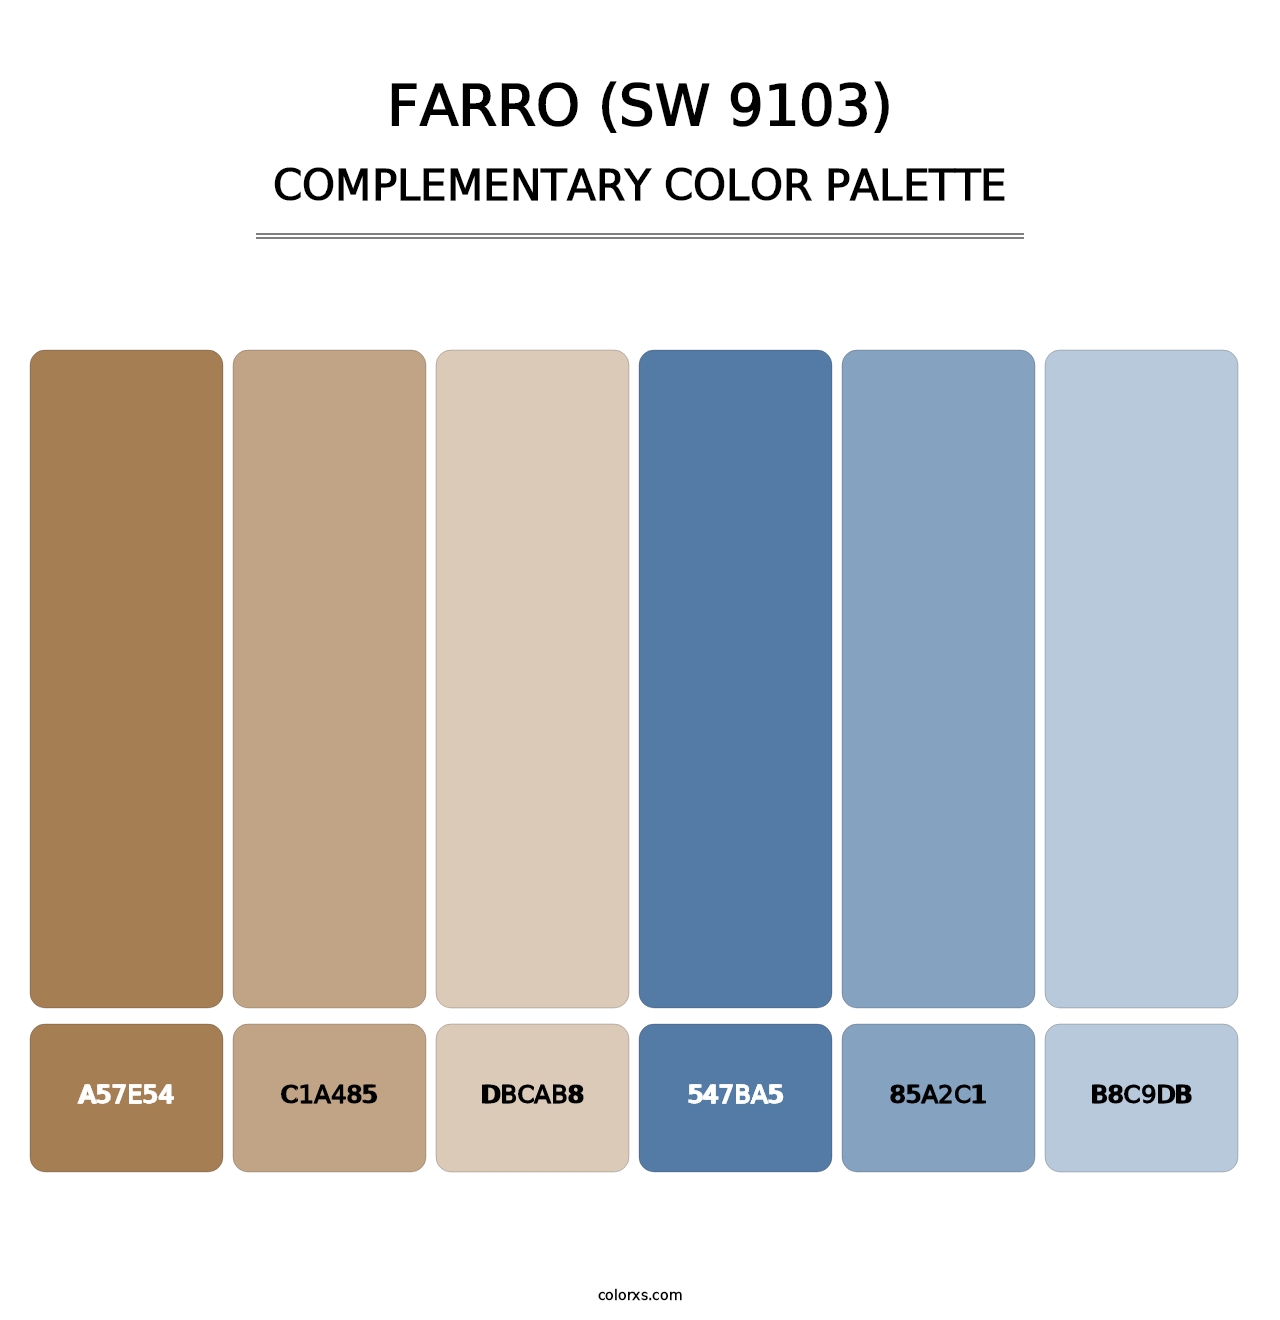 Farro (SW 9103) - Complementary Color Palette